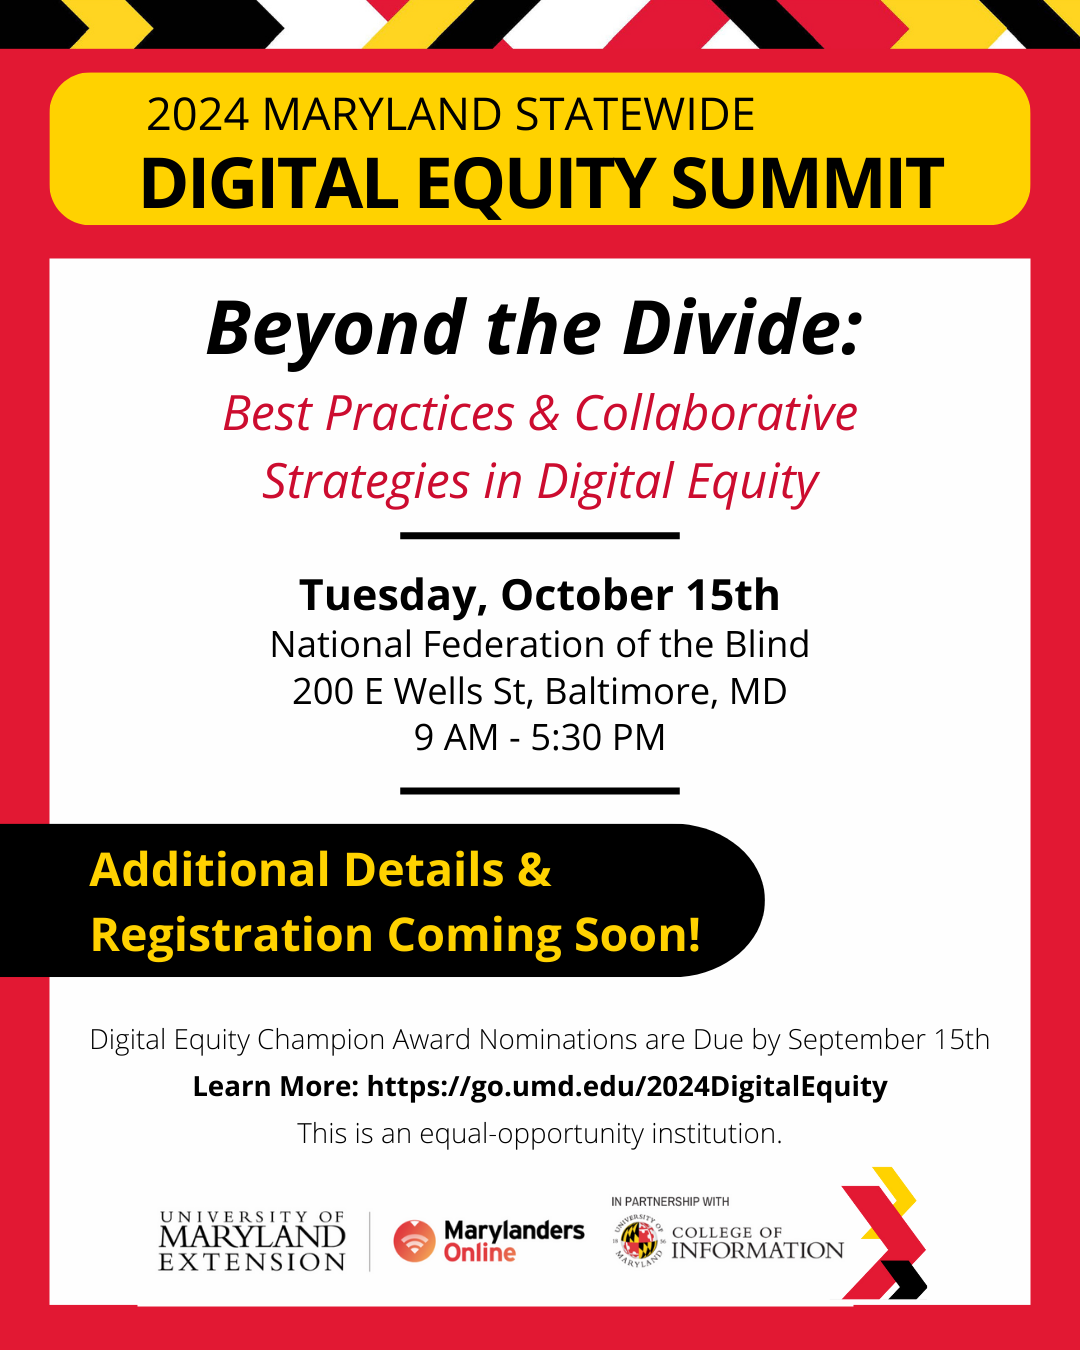 2024 Maryland Statewide Digital Equity Summit